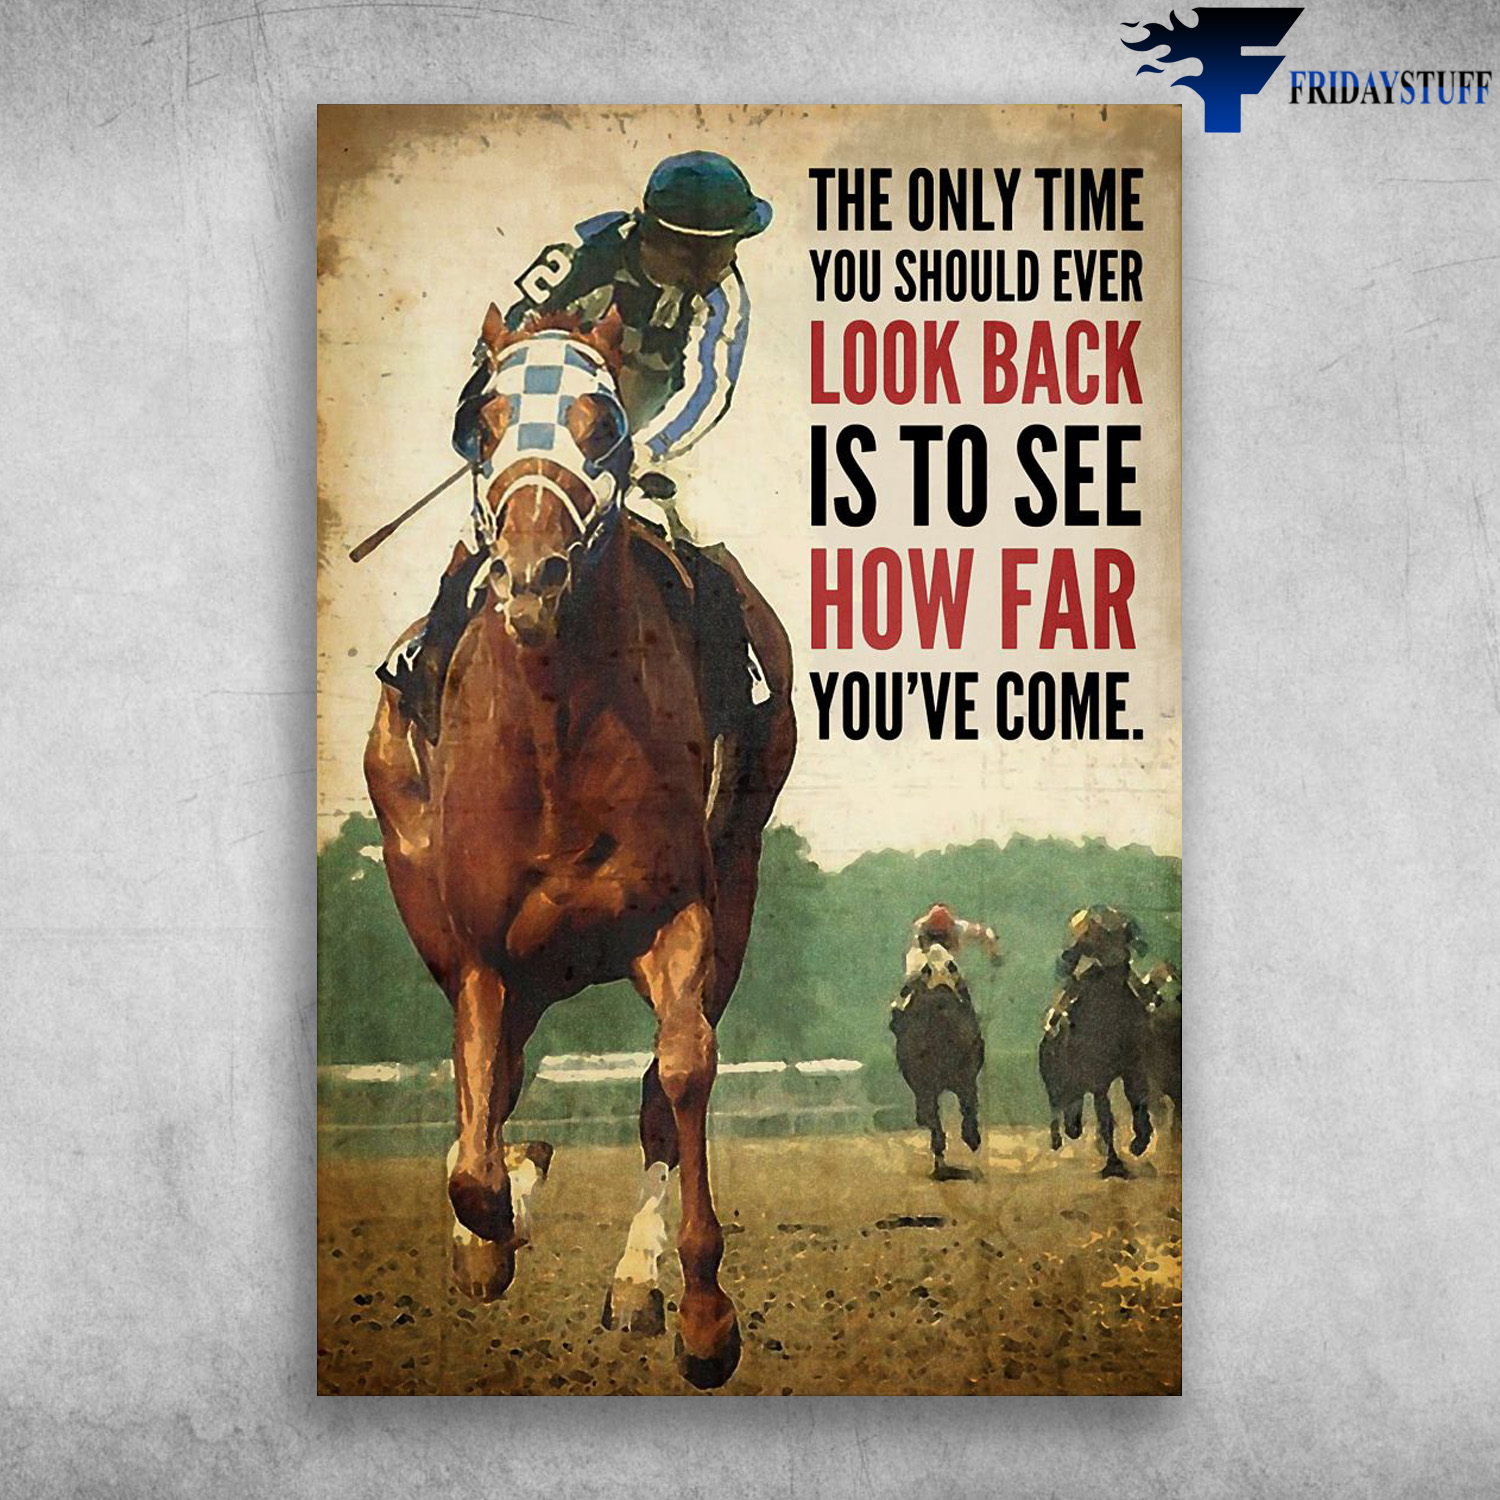 Horse Racing Man - The Only Time You Should Ever Look Back Is Too See How Far You've Come